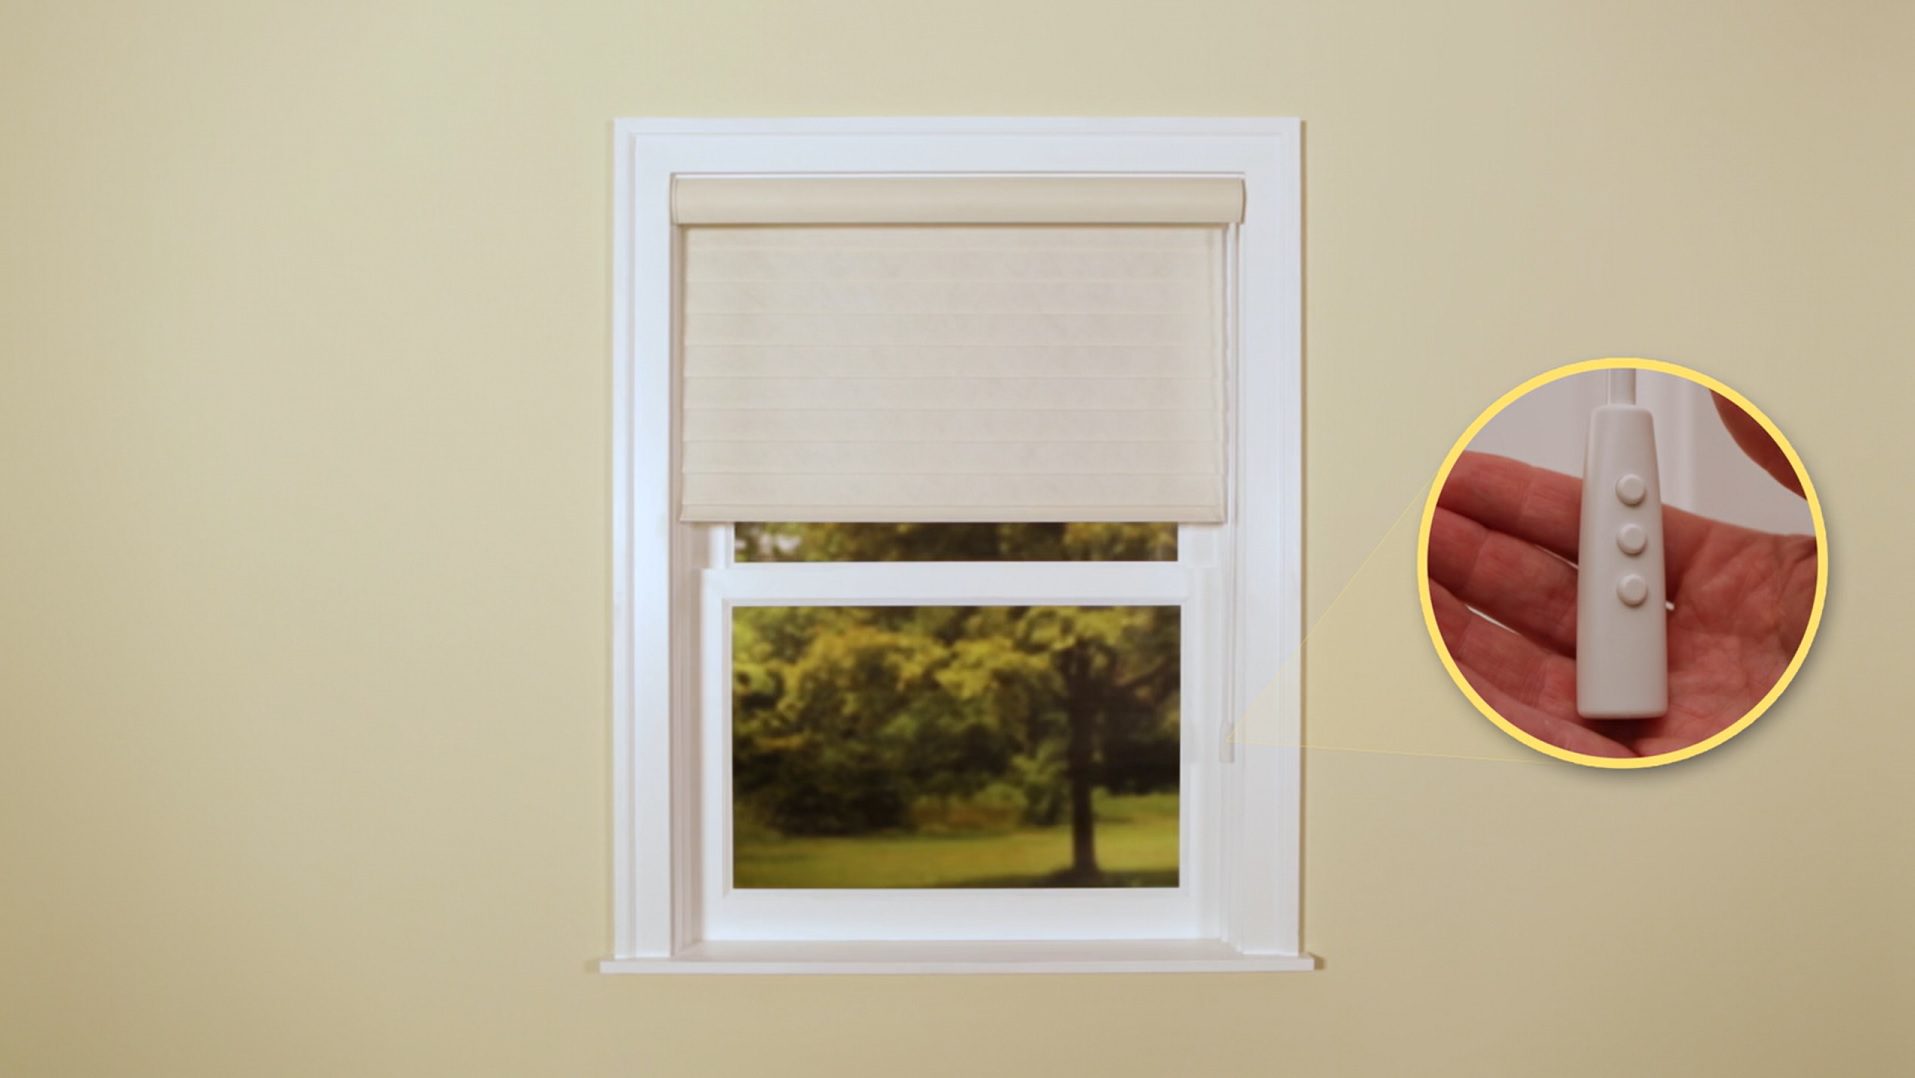 Window curtain with remote control